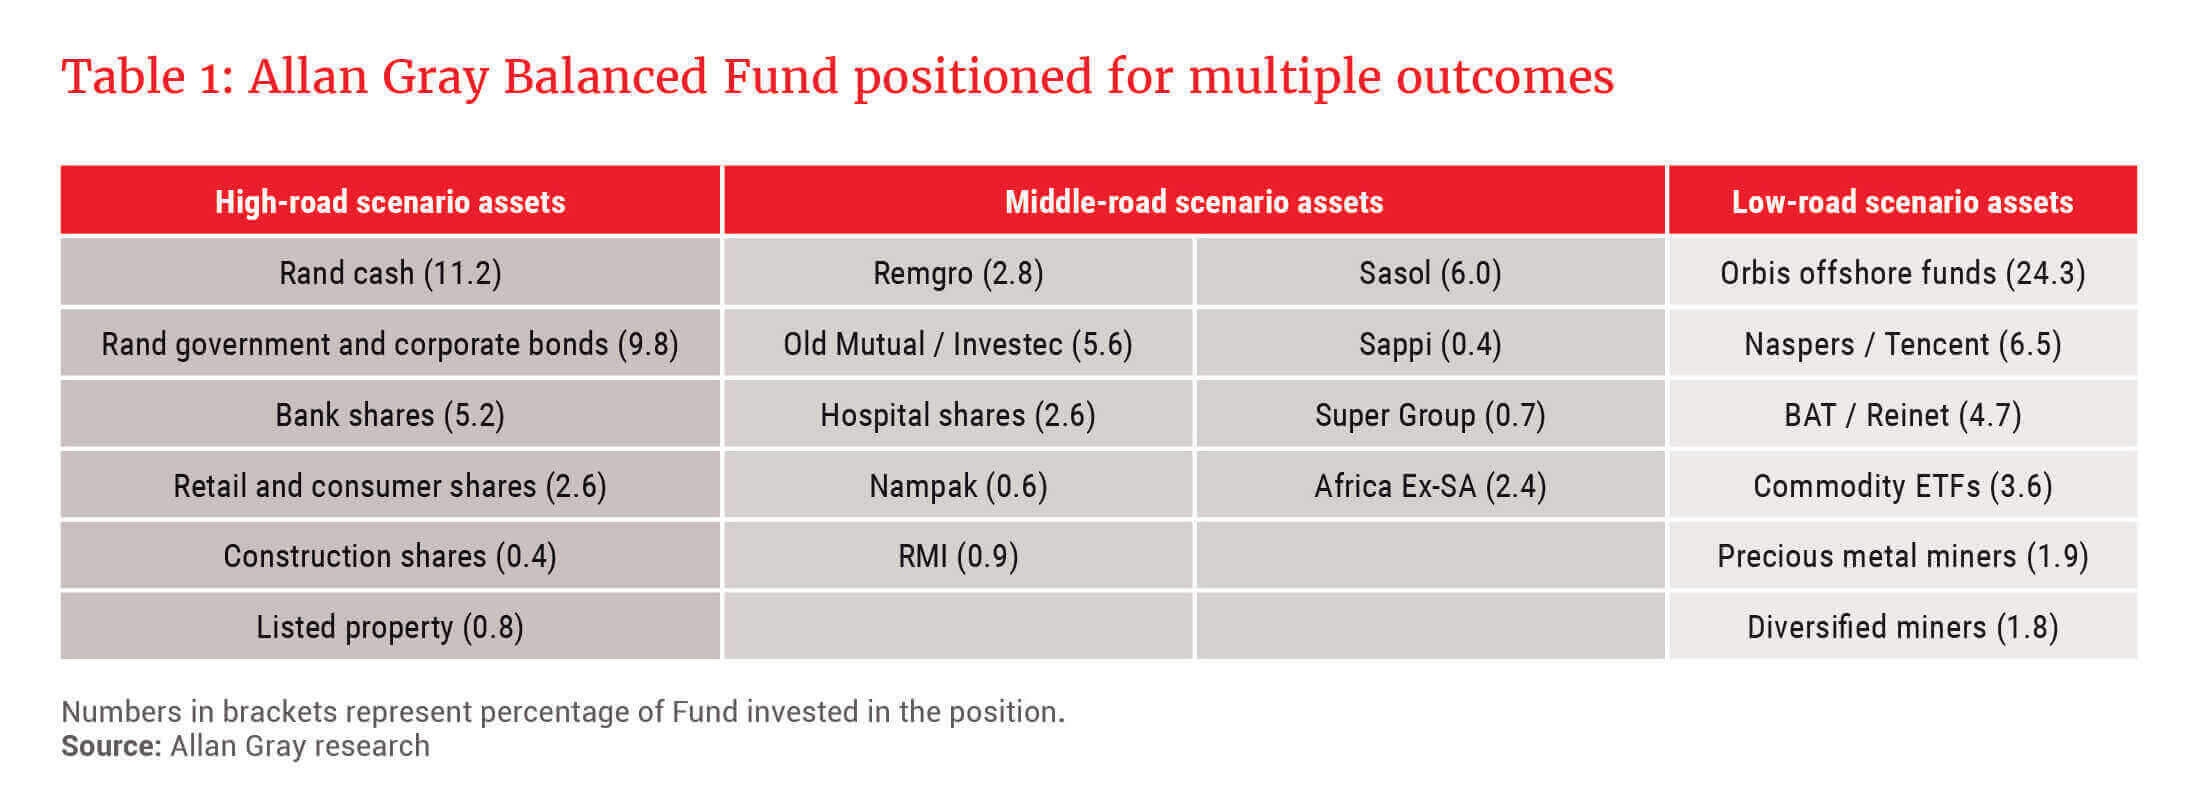 Allan Gray Balanced Fund positioned for multiple outcomes